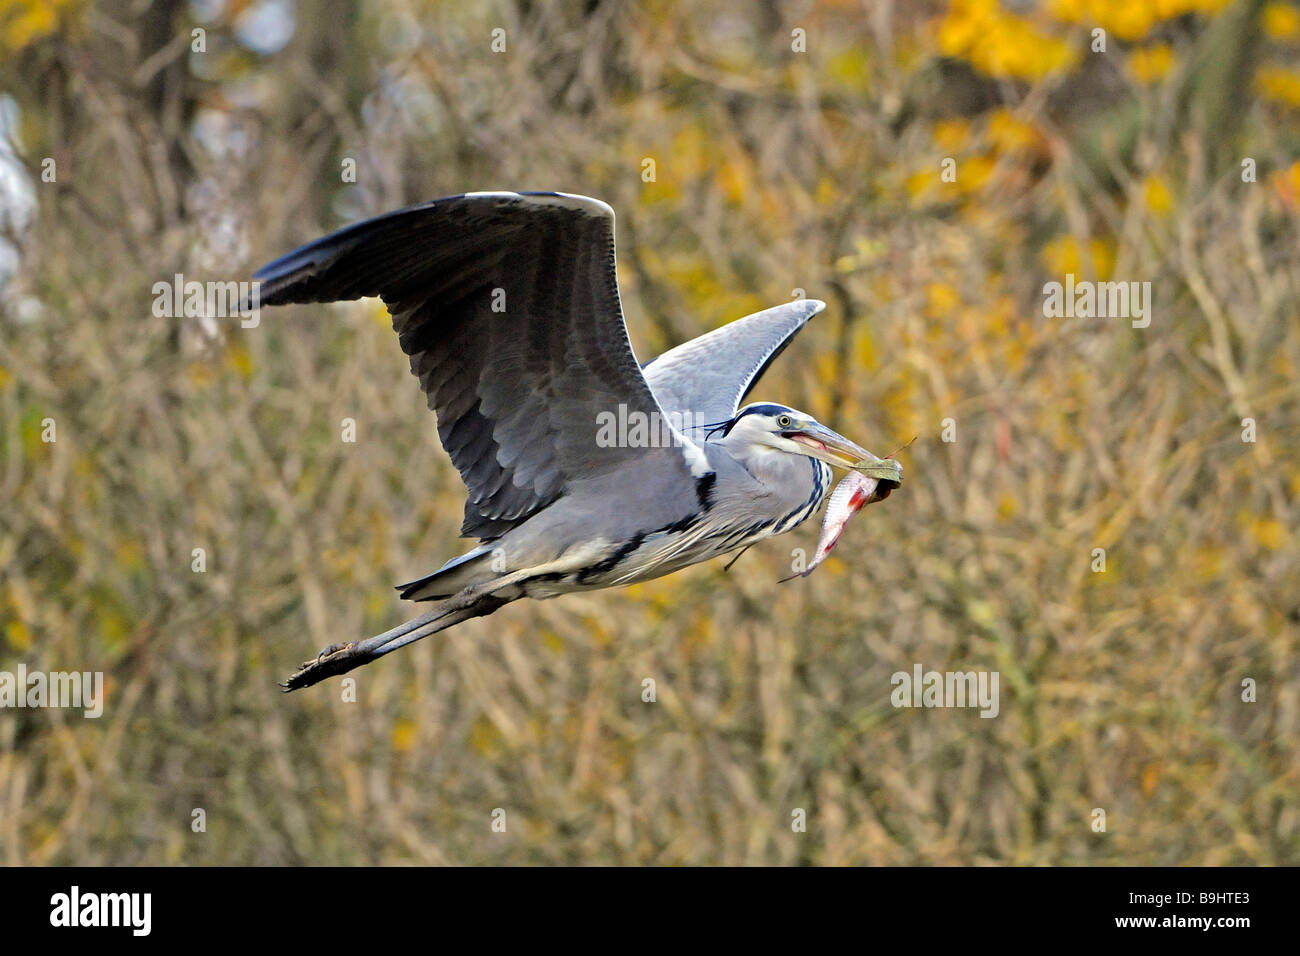 Greylag Goose (Anser anser), flying with captured Common Roach (Rutilus rutilus) Stock Photo